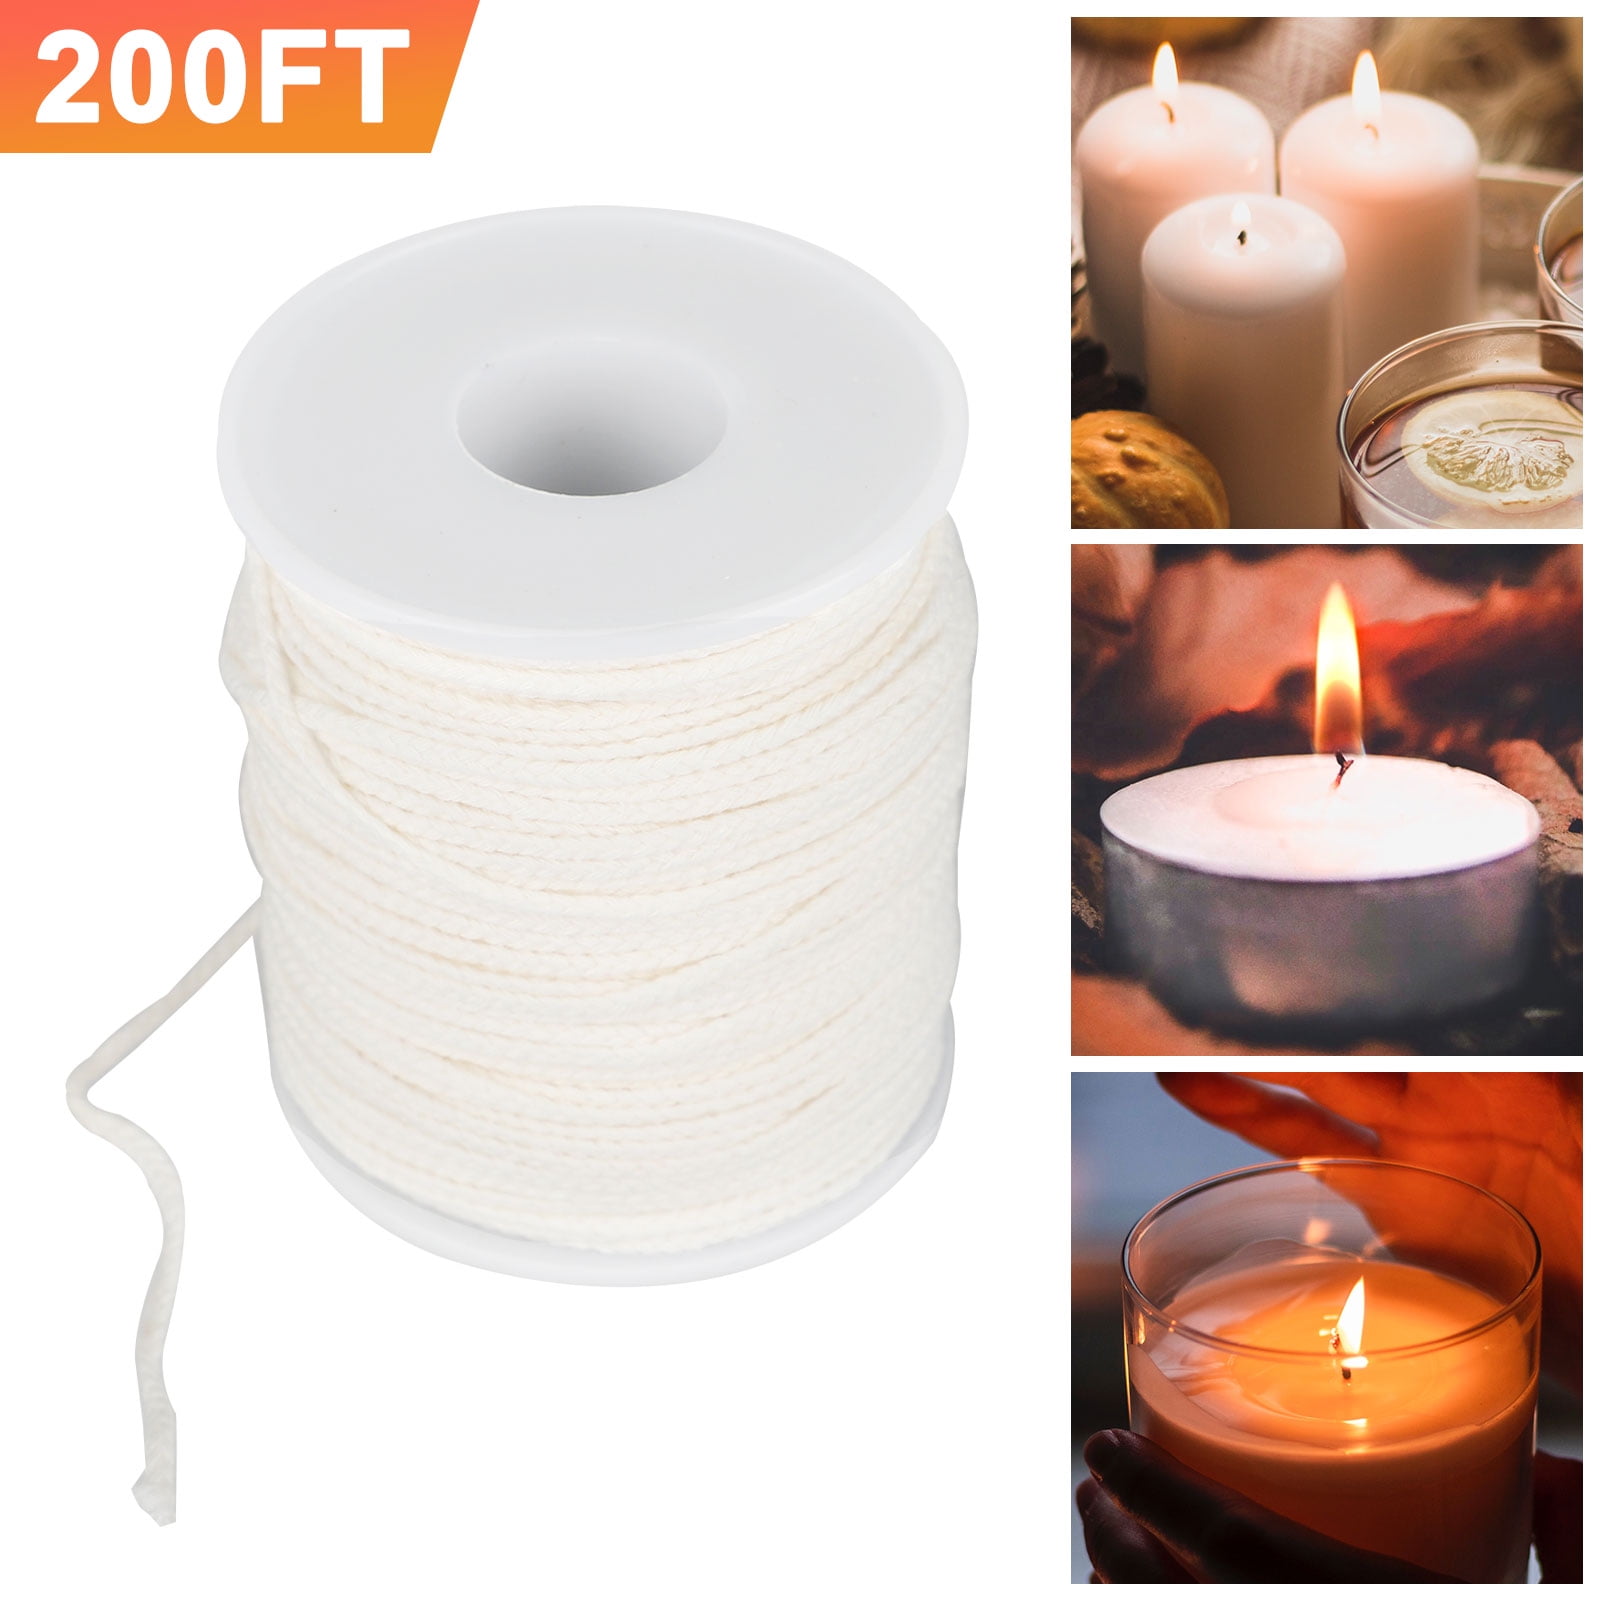 300Pcs Natural Low Smoke Candle Wicks,Pre-Waxed Cotton Core Wicks 6inch with Candle Wick Stickers and Candle Wick Centering Device for Pillar Candle Making and Candle DIY Christmas Gift 